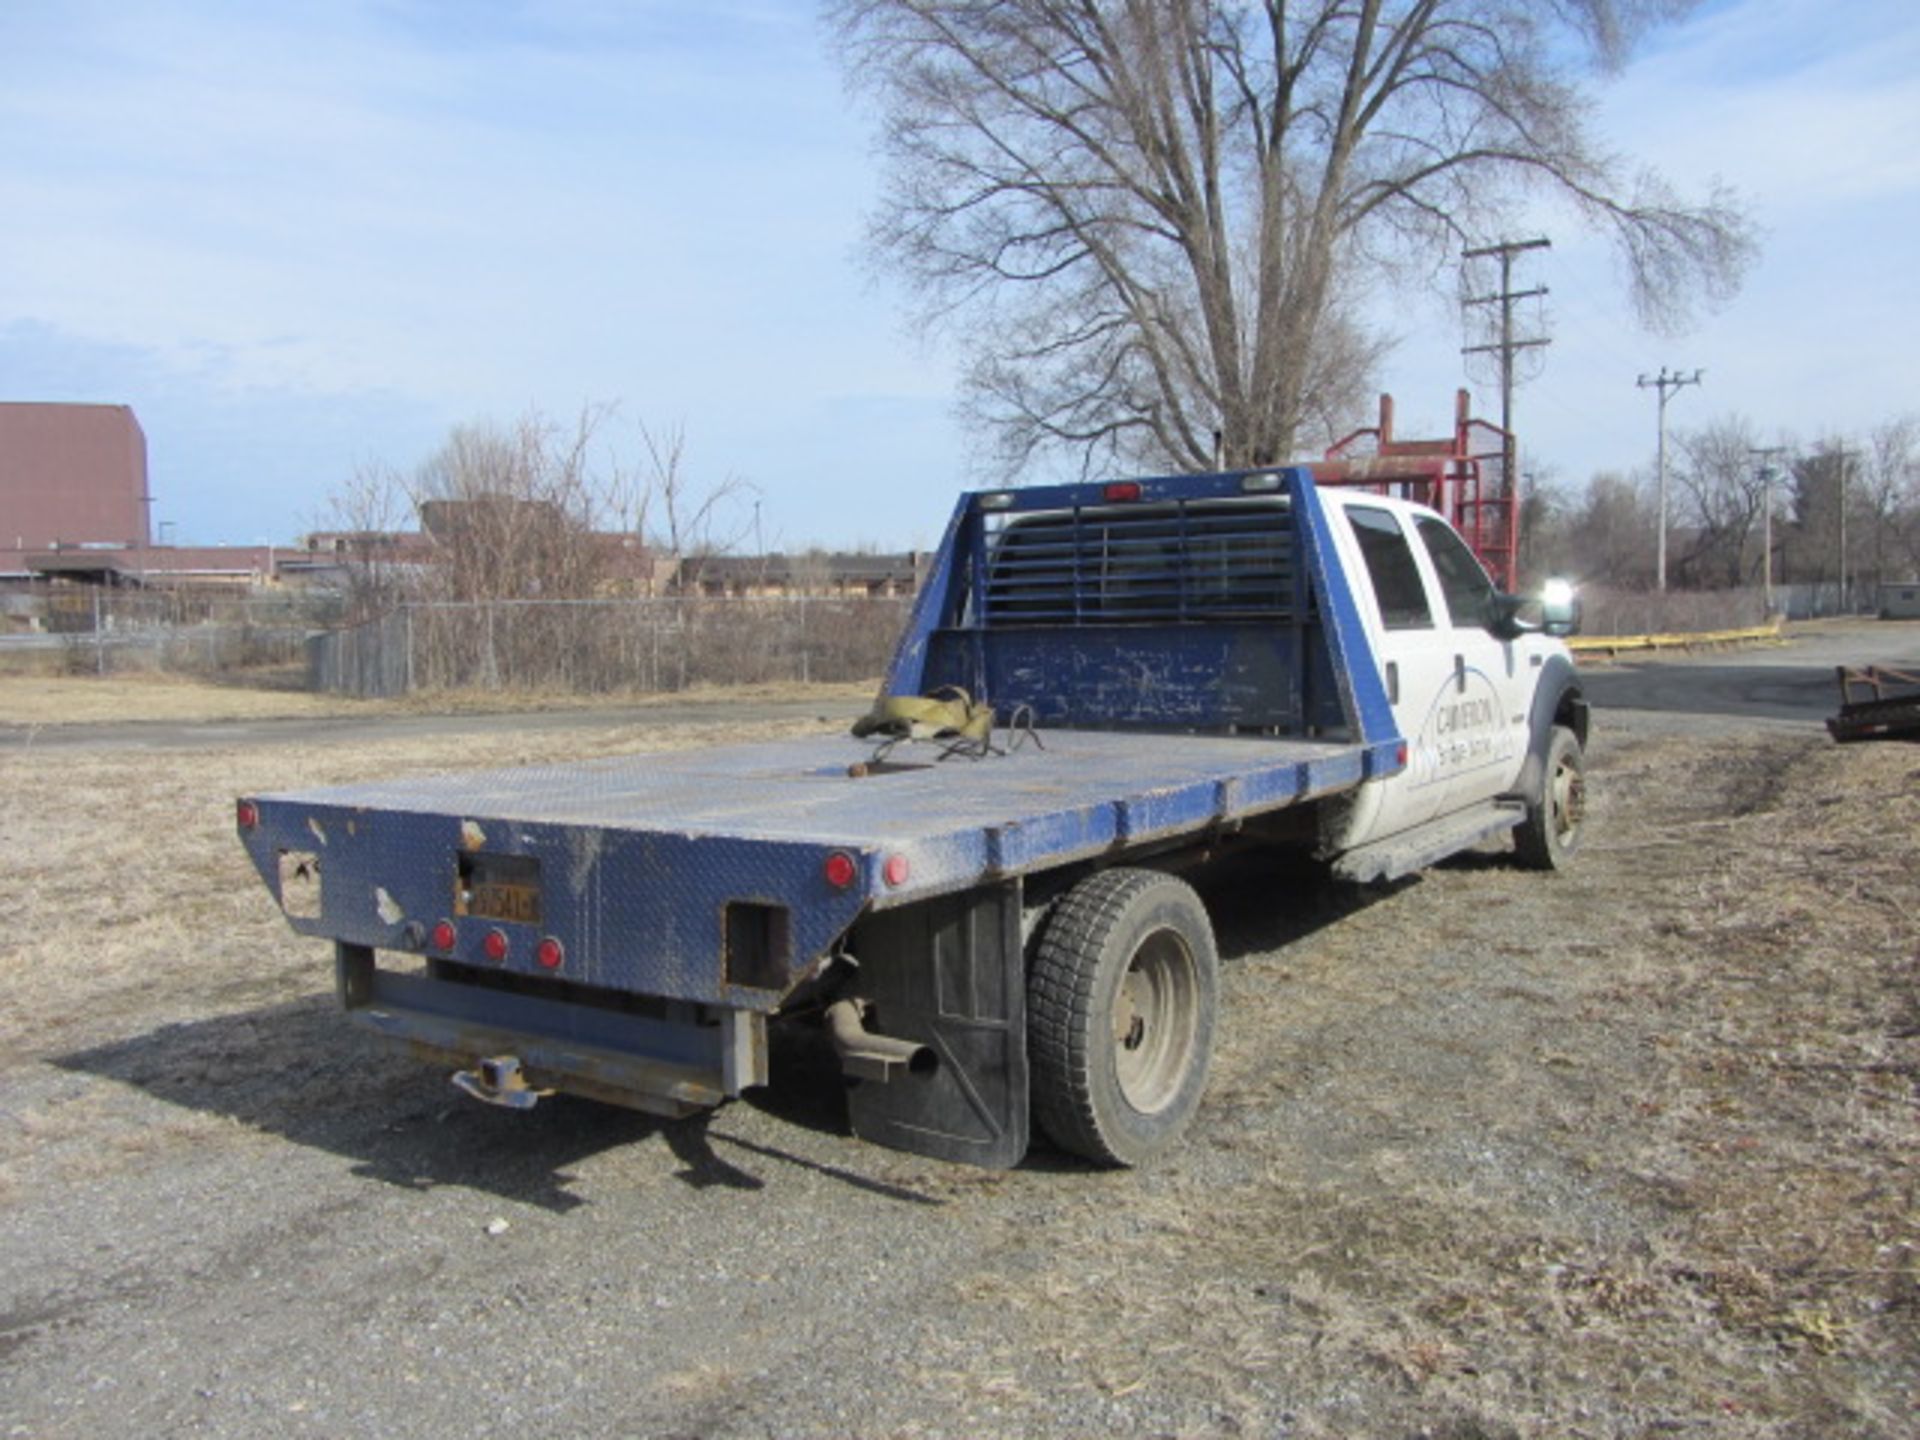 Ford F550 XLT Super Duty Flat Bed Truck with Gooseneck Hitch, 10' Diamond Plate Deck, Dual Rear - Image 4 of 6